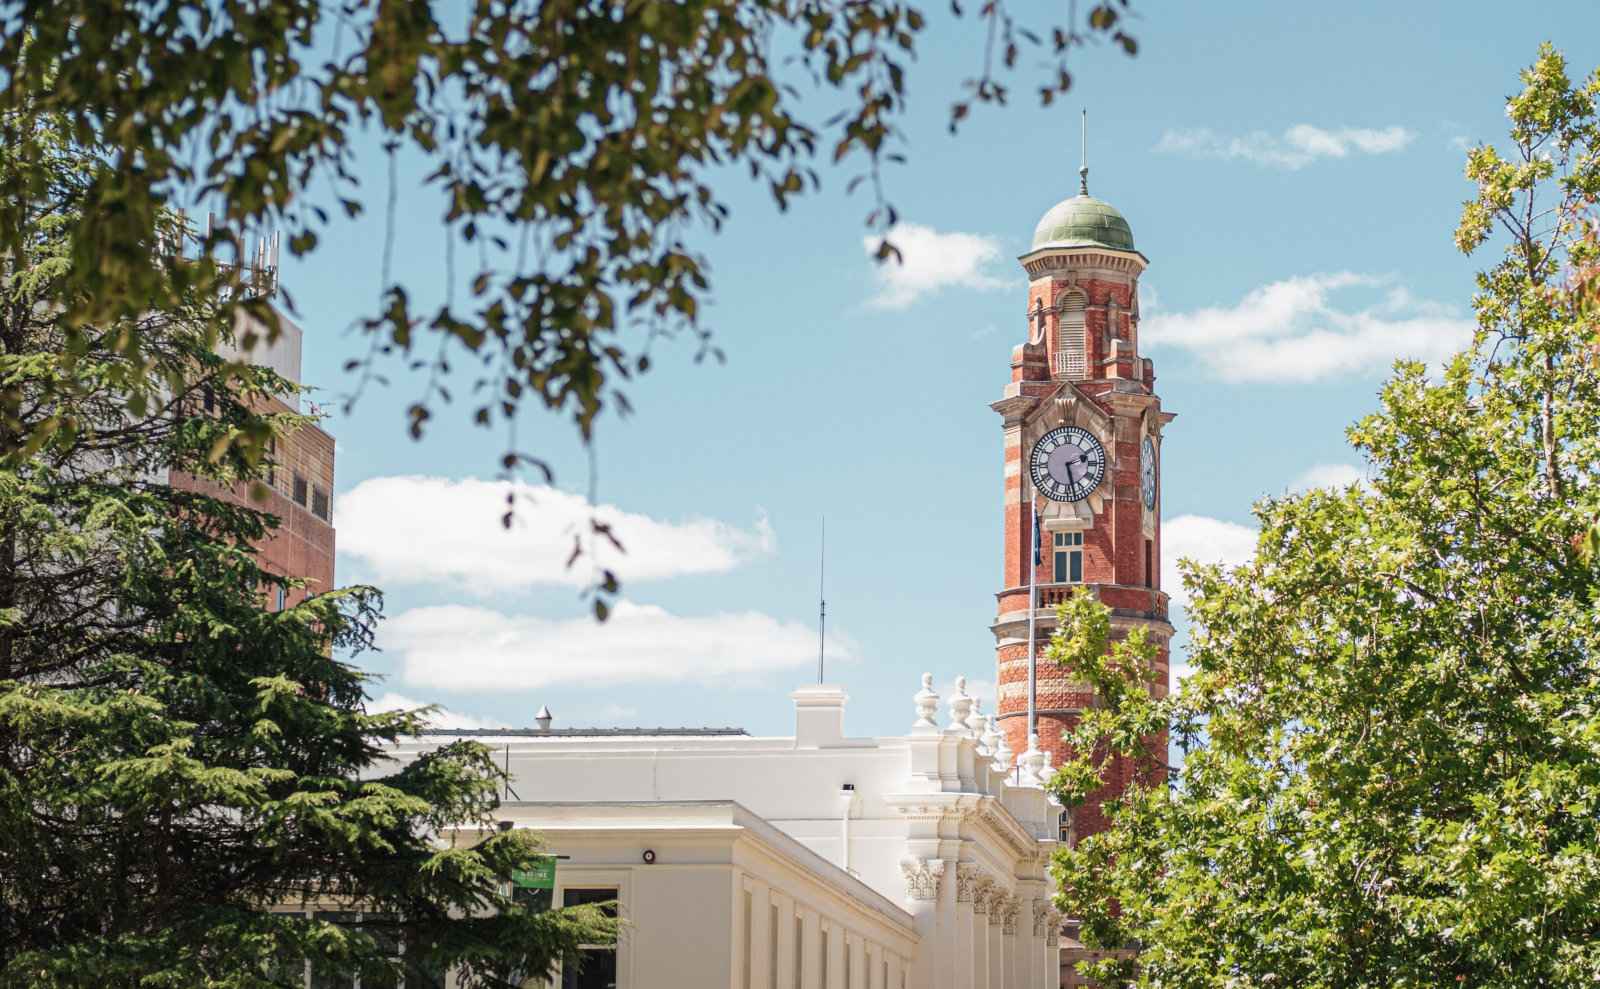 The Coolest Things To Do In Launceston, Tasmania and Surrounds